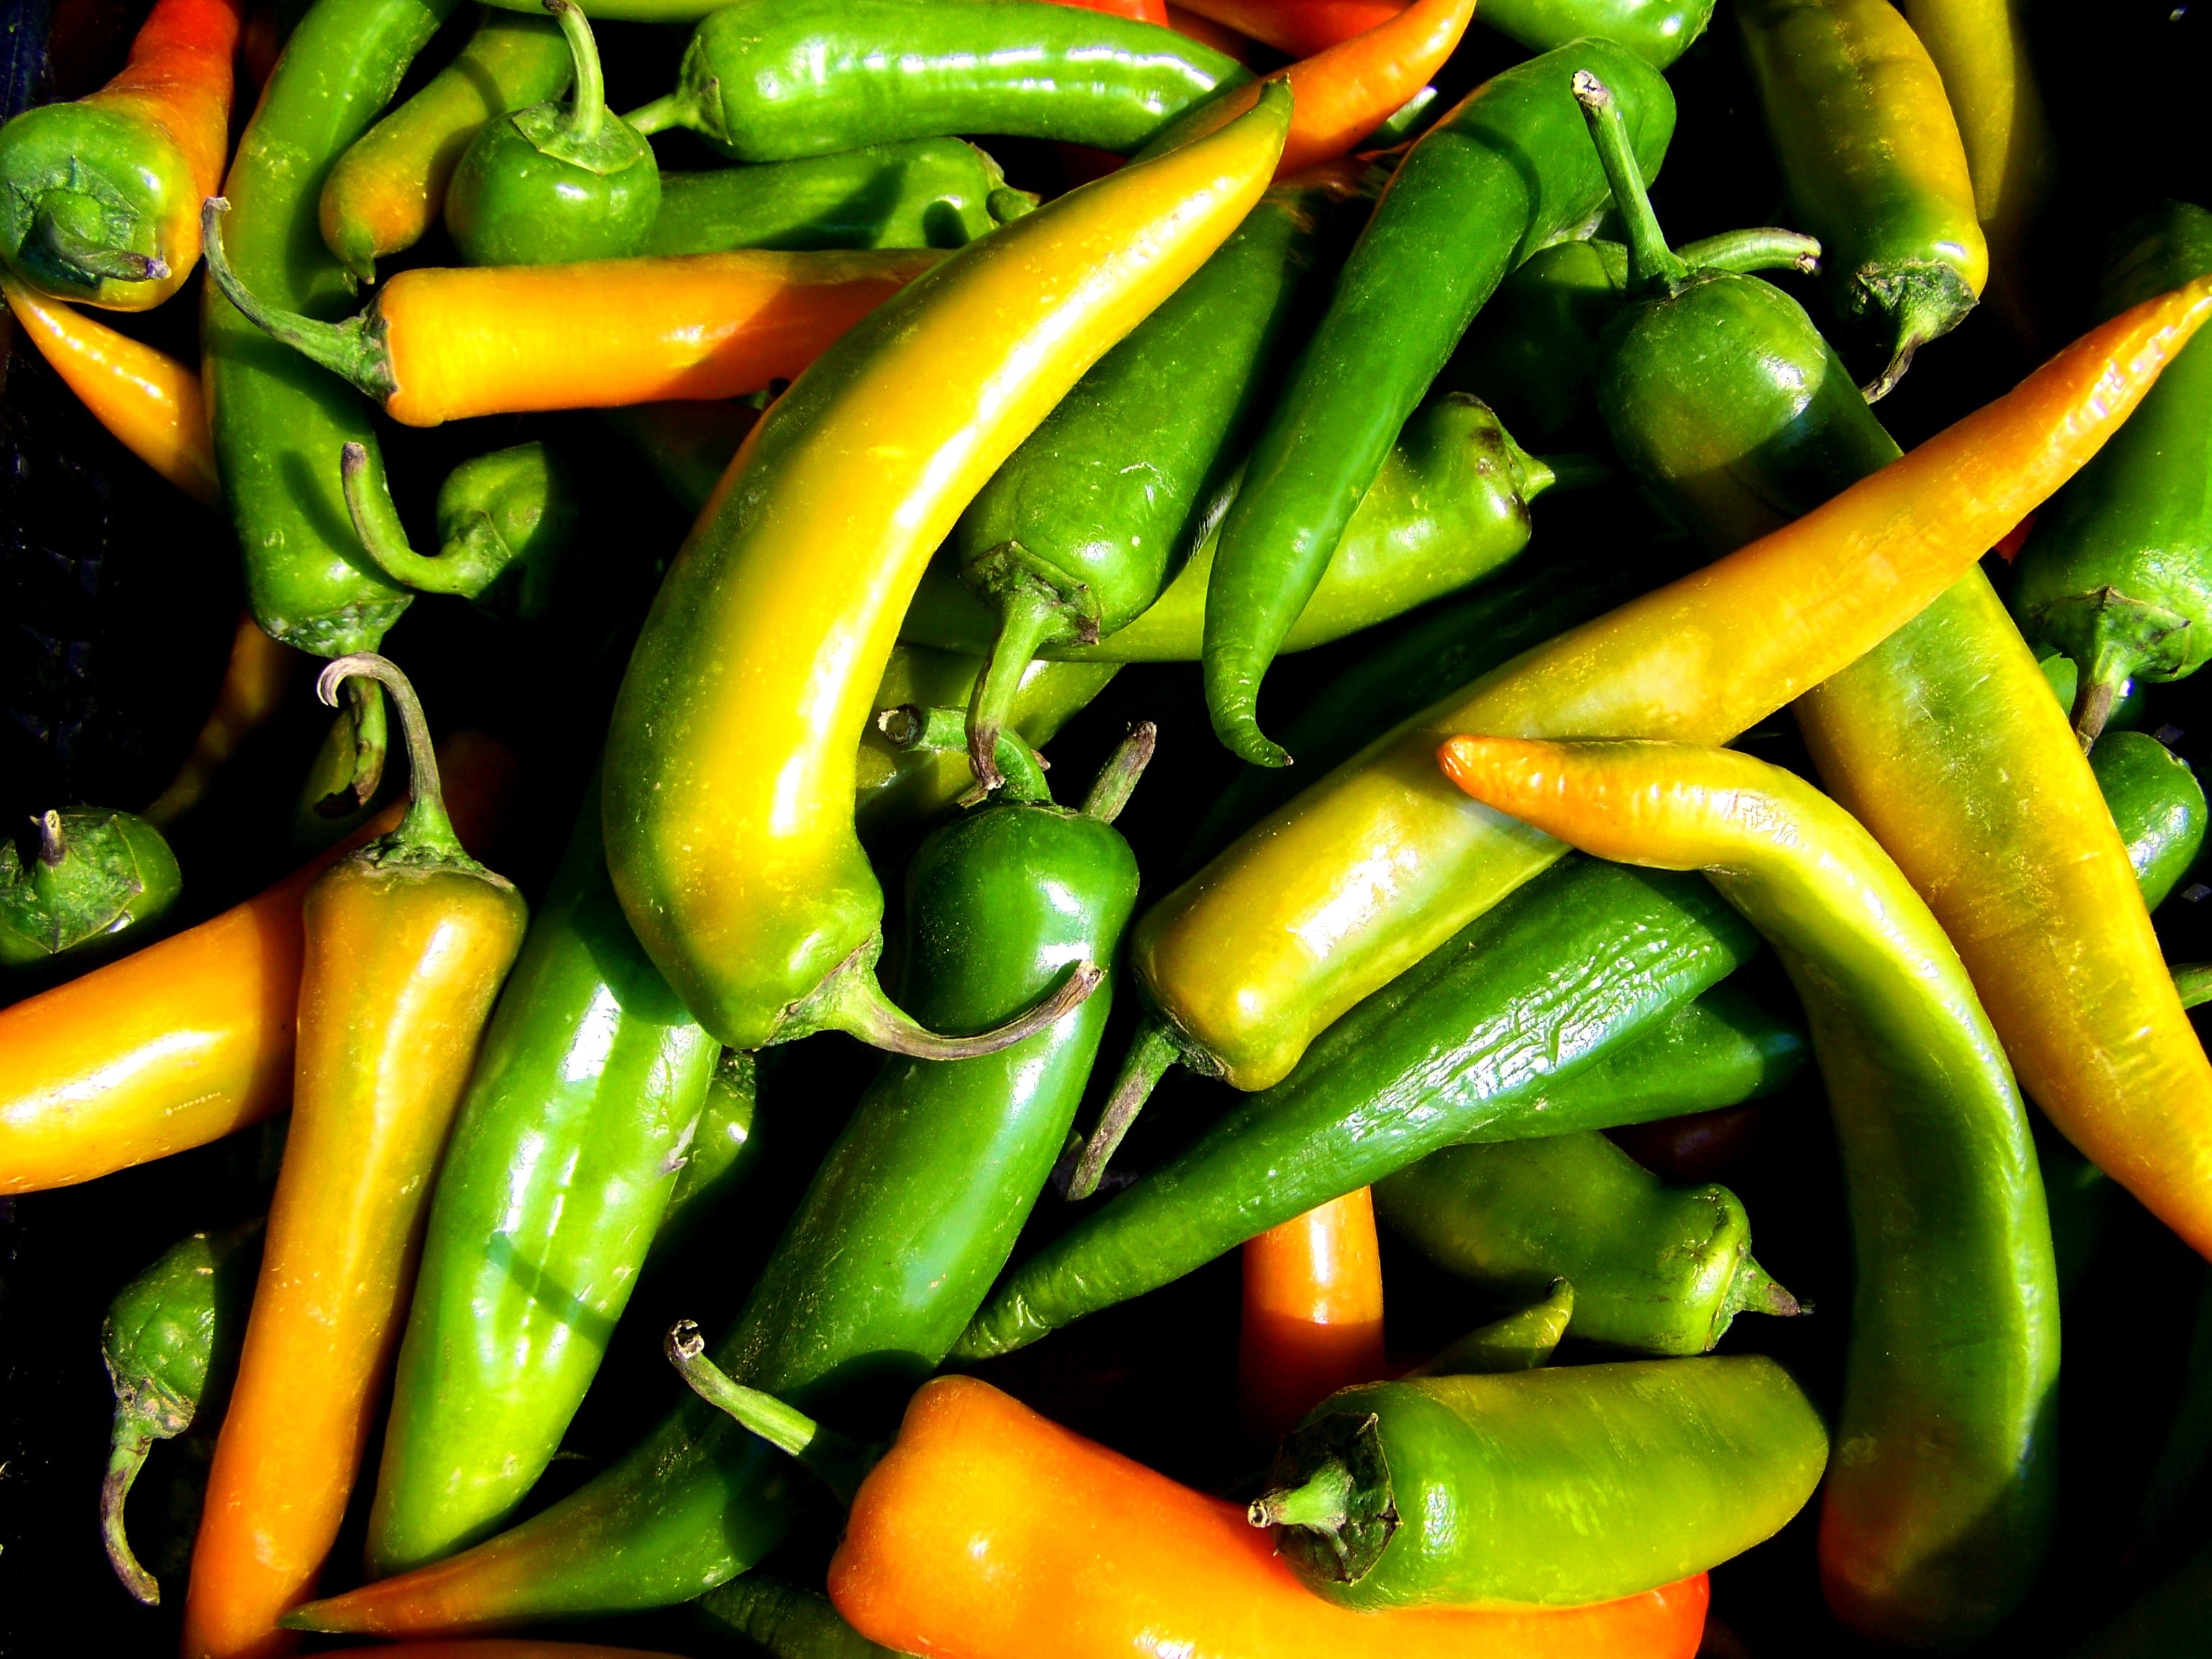 2560x1440 wallpaper green and yellow chili pepper Peakpx